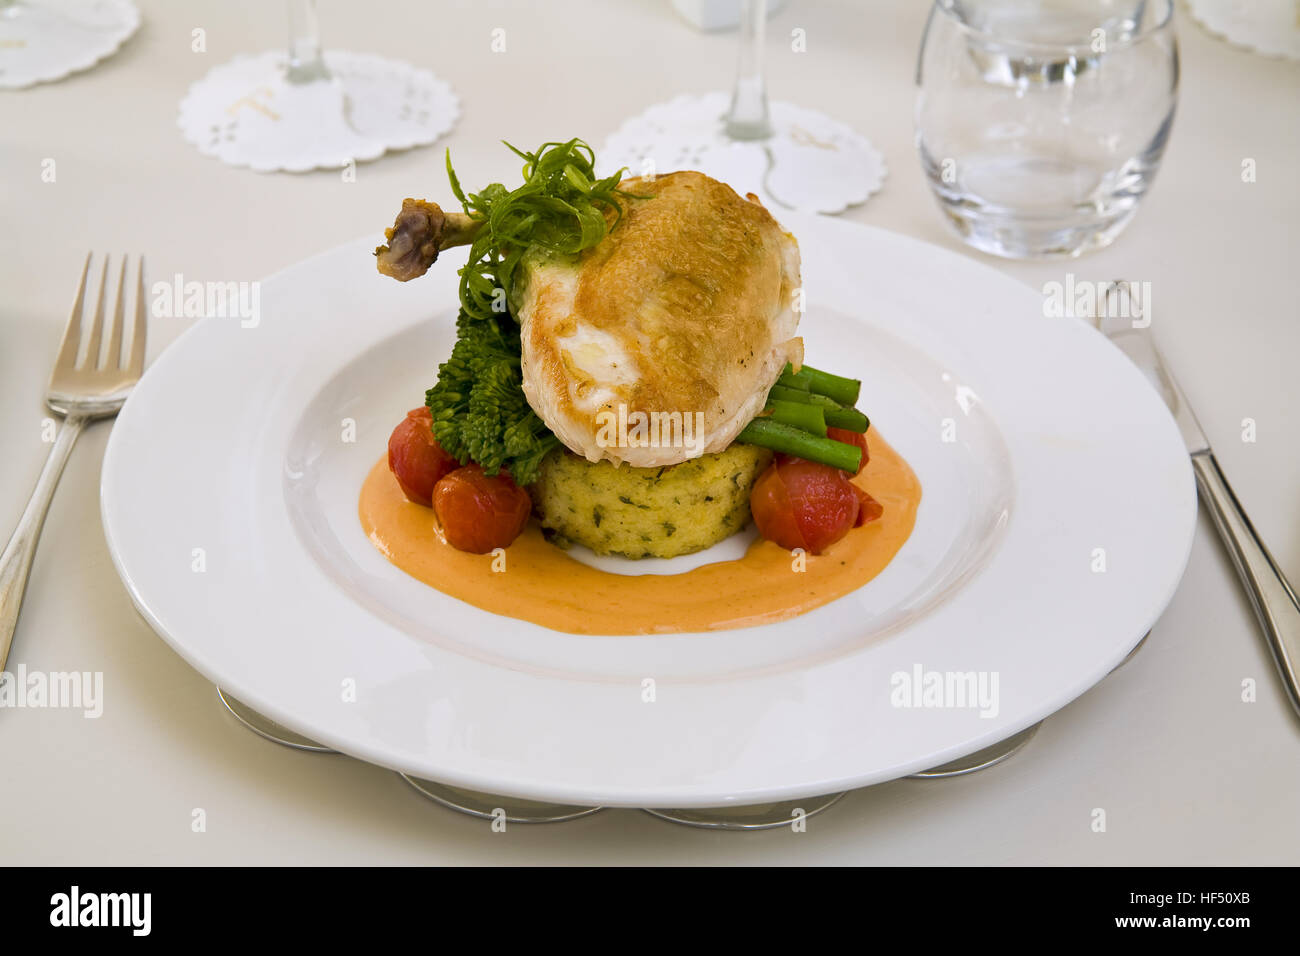 Nouvelle cuisine served in restaurant place setting Stock Photo